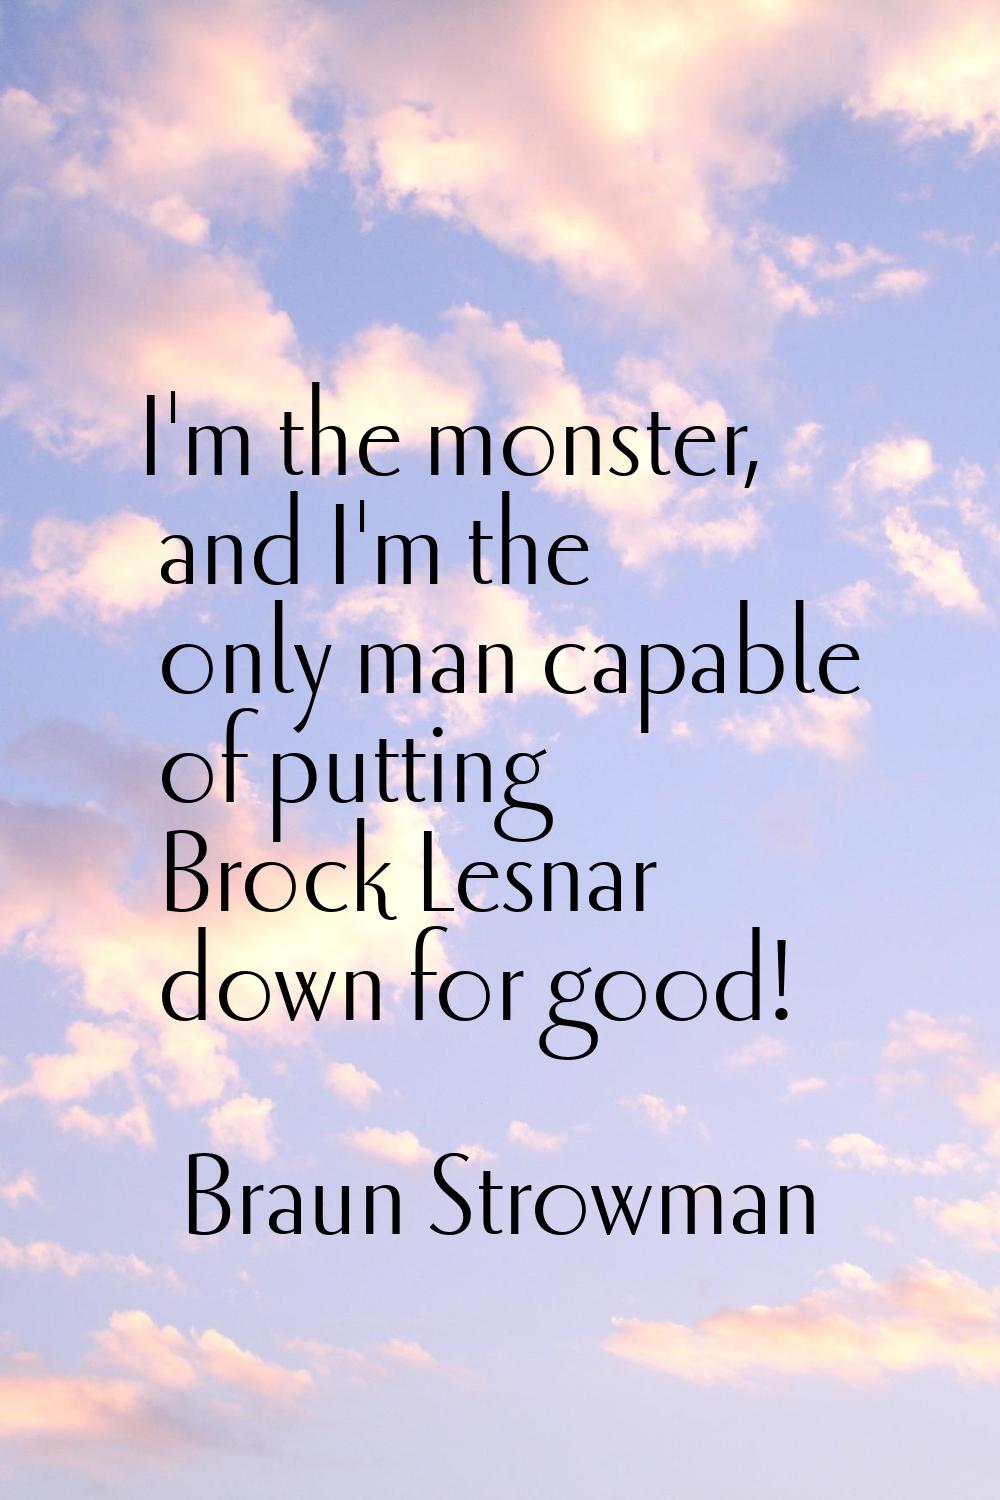 I'm the monster, and I'm the only man capable of putting Brock Lesnar down for good!